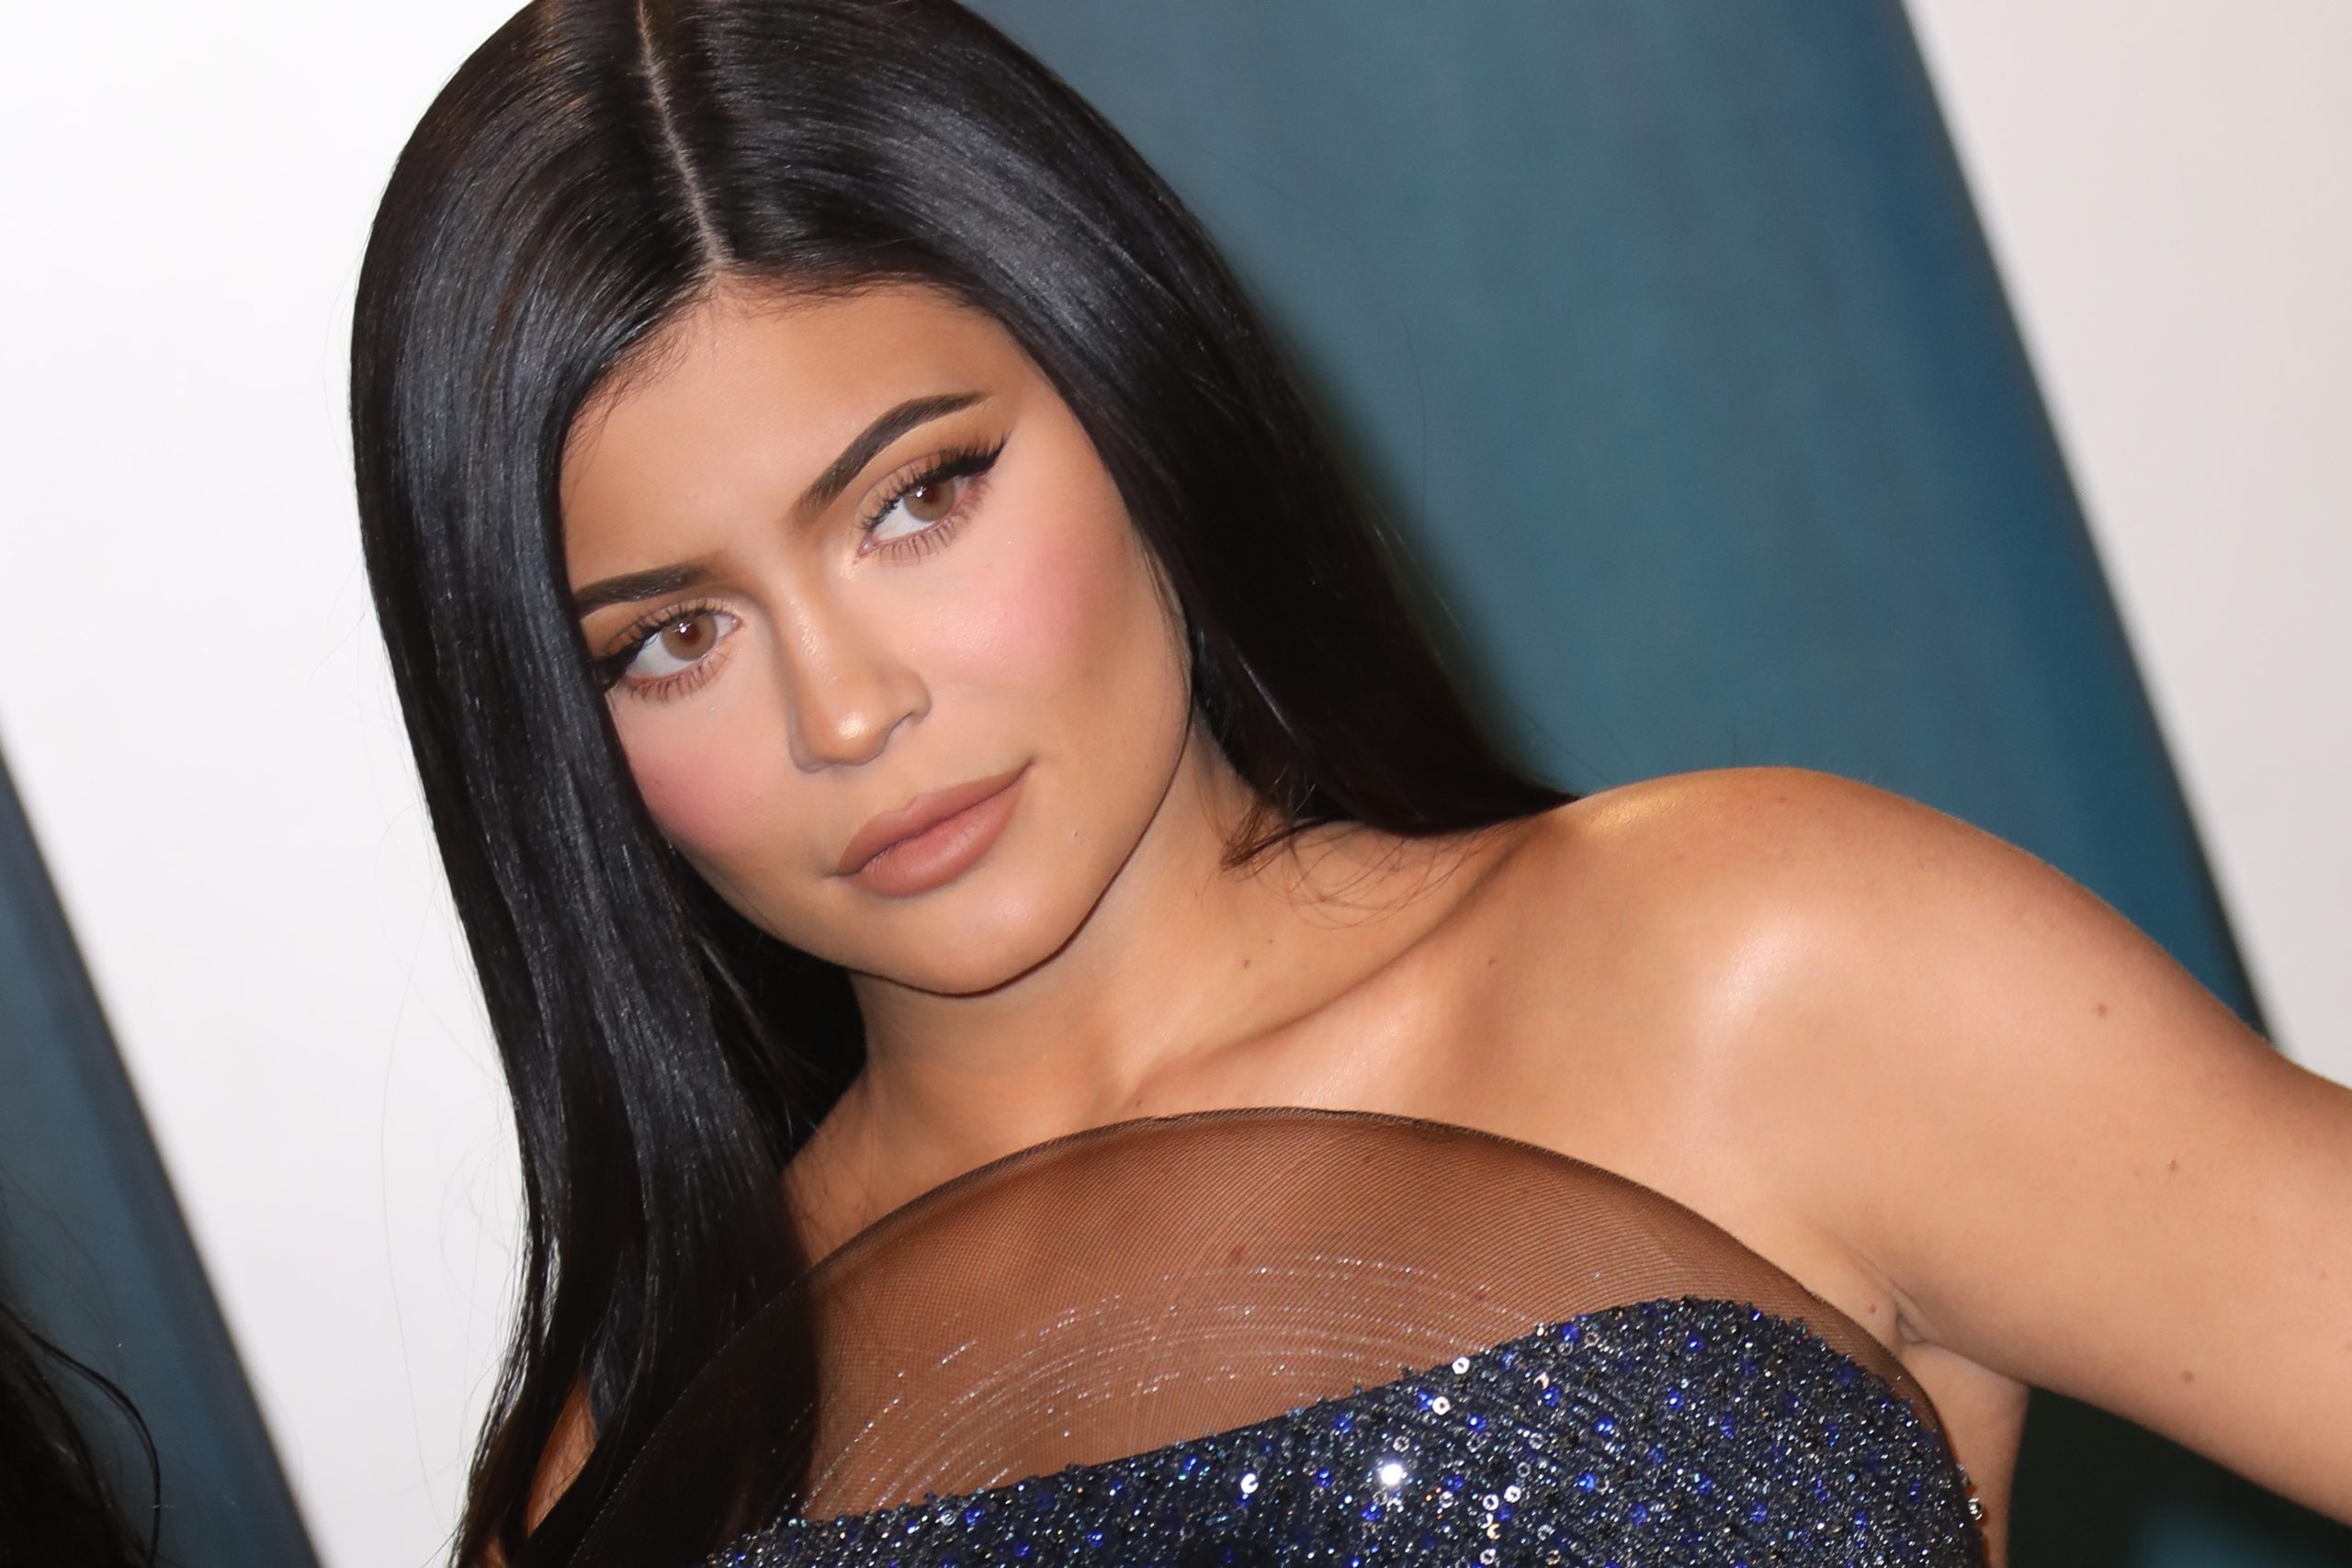 Kylie Jenner Got a Mismatched French Manicure With Neon Orange and Green Tips